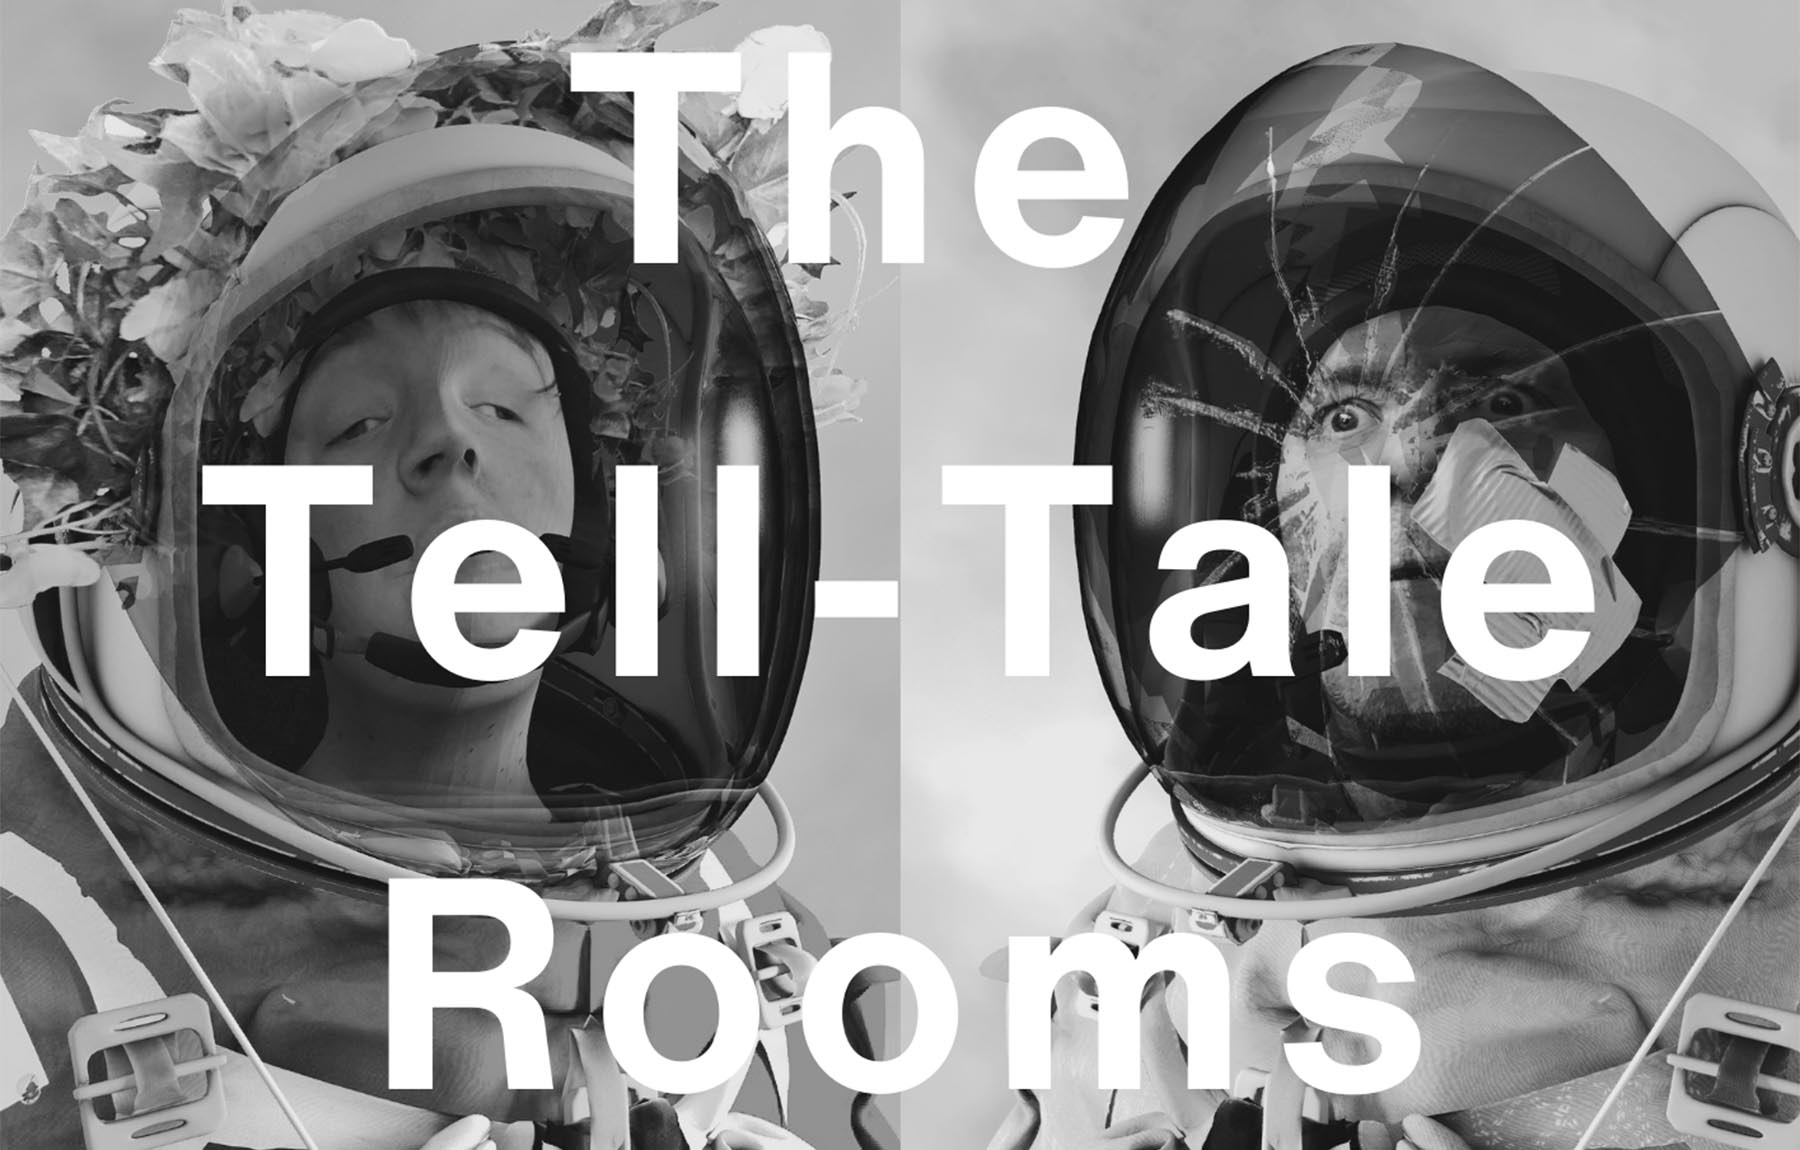 Andrew & Eden Kötting The Tell-Tale Rooms